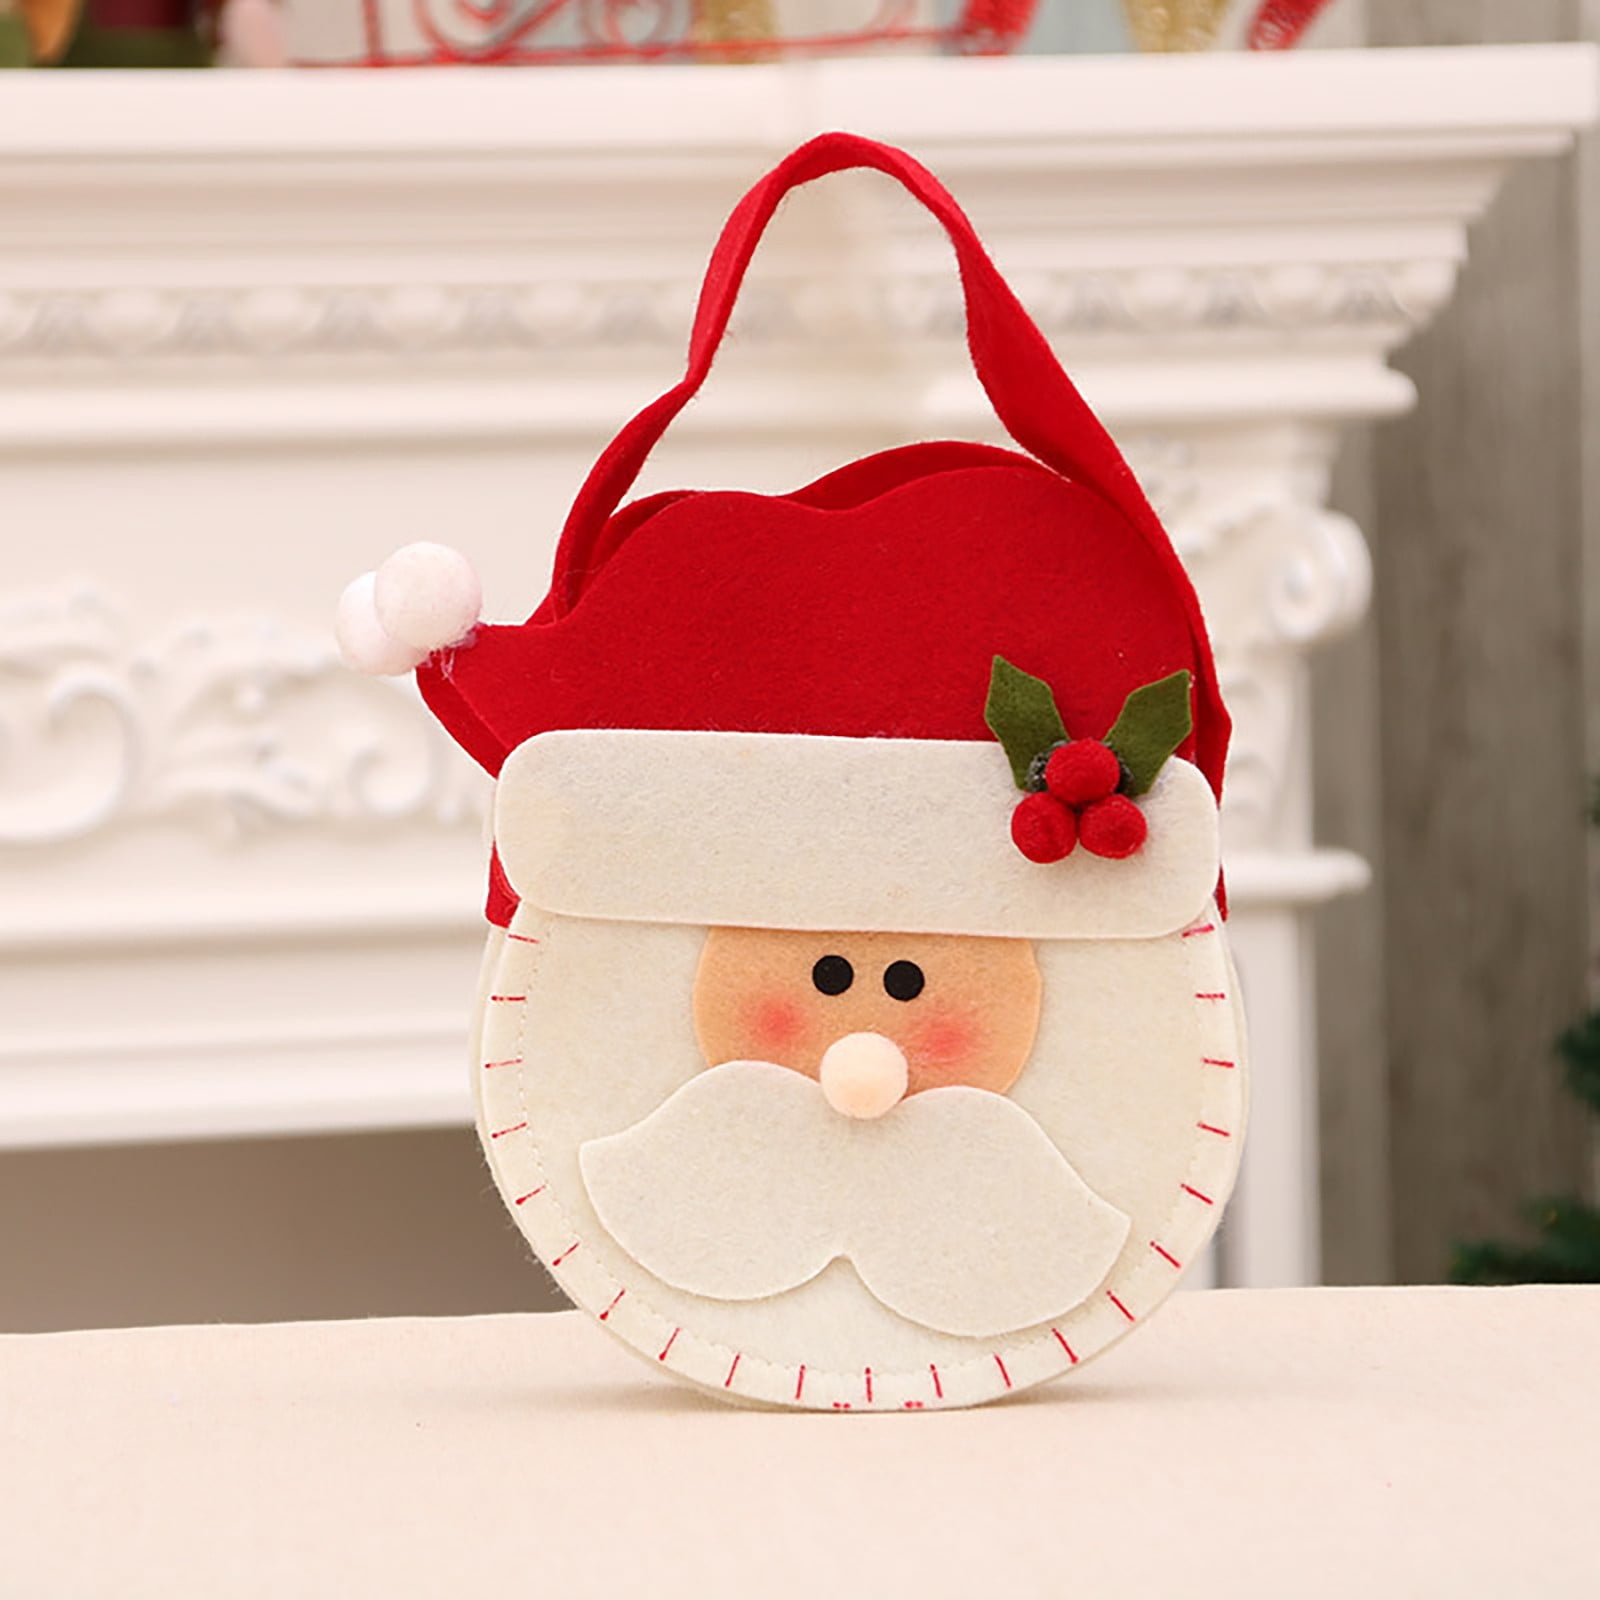 JDEFEG Party Favors for Kids 8-12 Christmas Drawstring Gift Bags Christmas  Candy Bags Gift Bags Christmas Party Gifts 